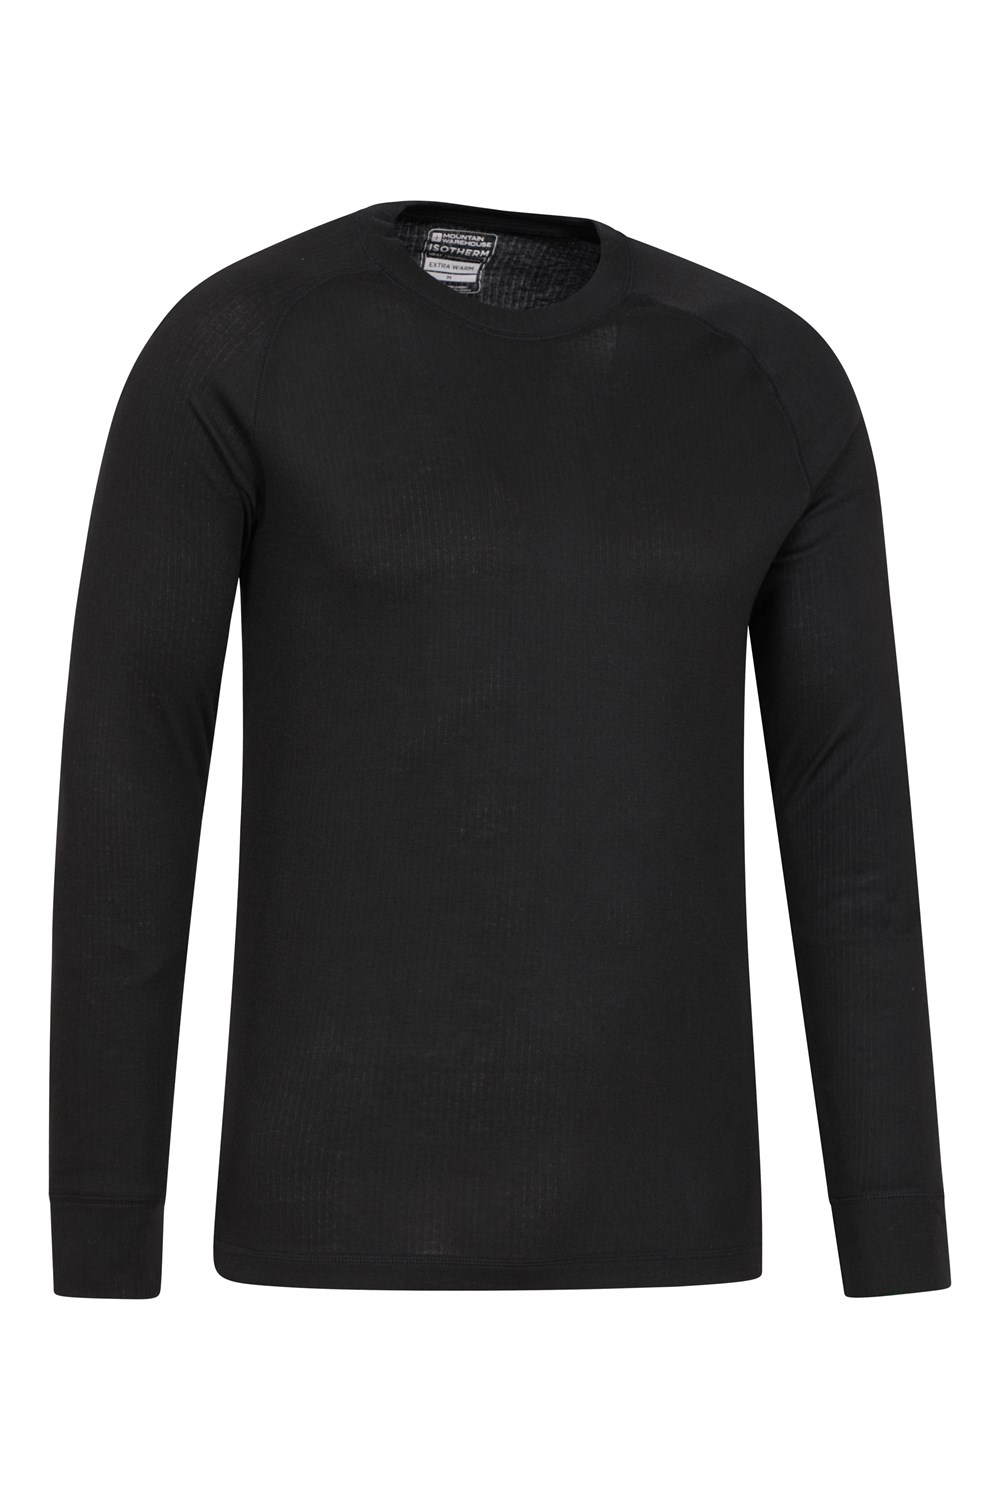 Mountain Warehouse Men's Talus Base Layer Top Long Sleeved Thermal ...